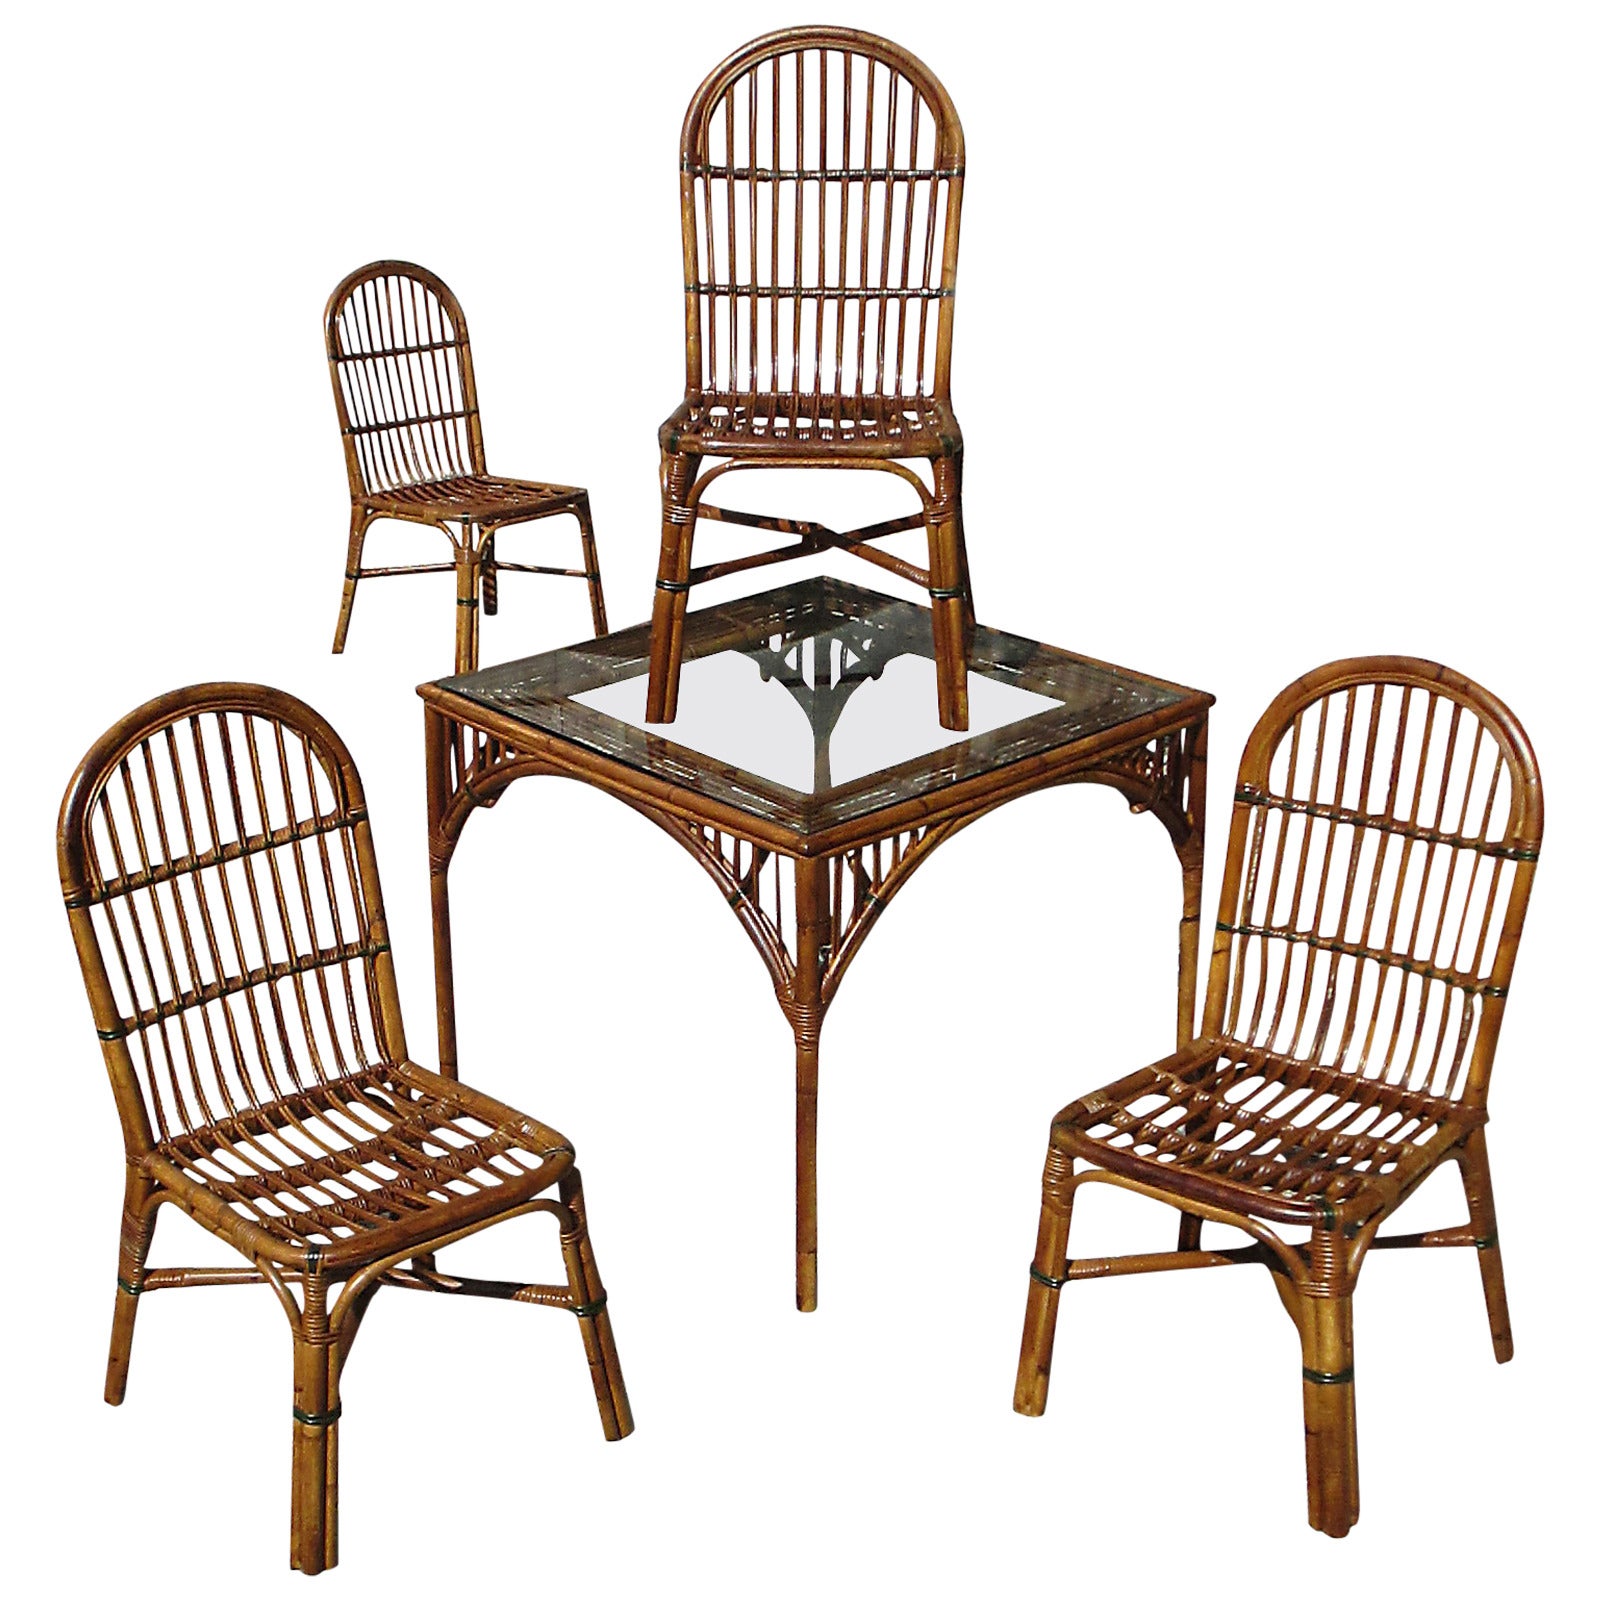 Five-Piece Stick Wicker Dining Set For Sale